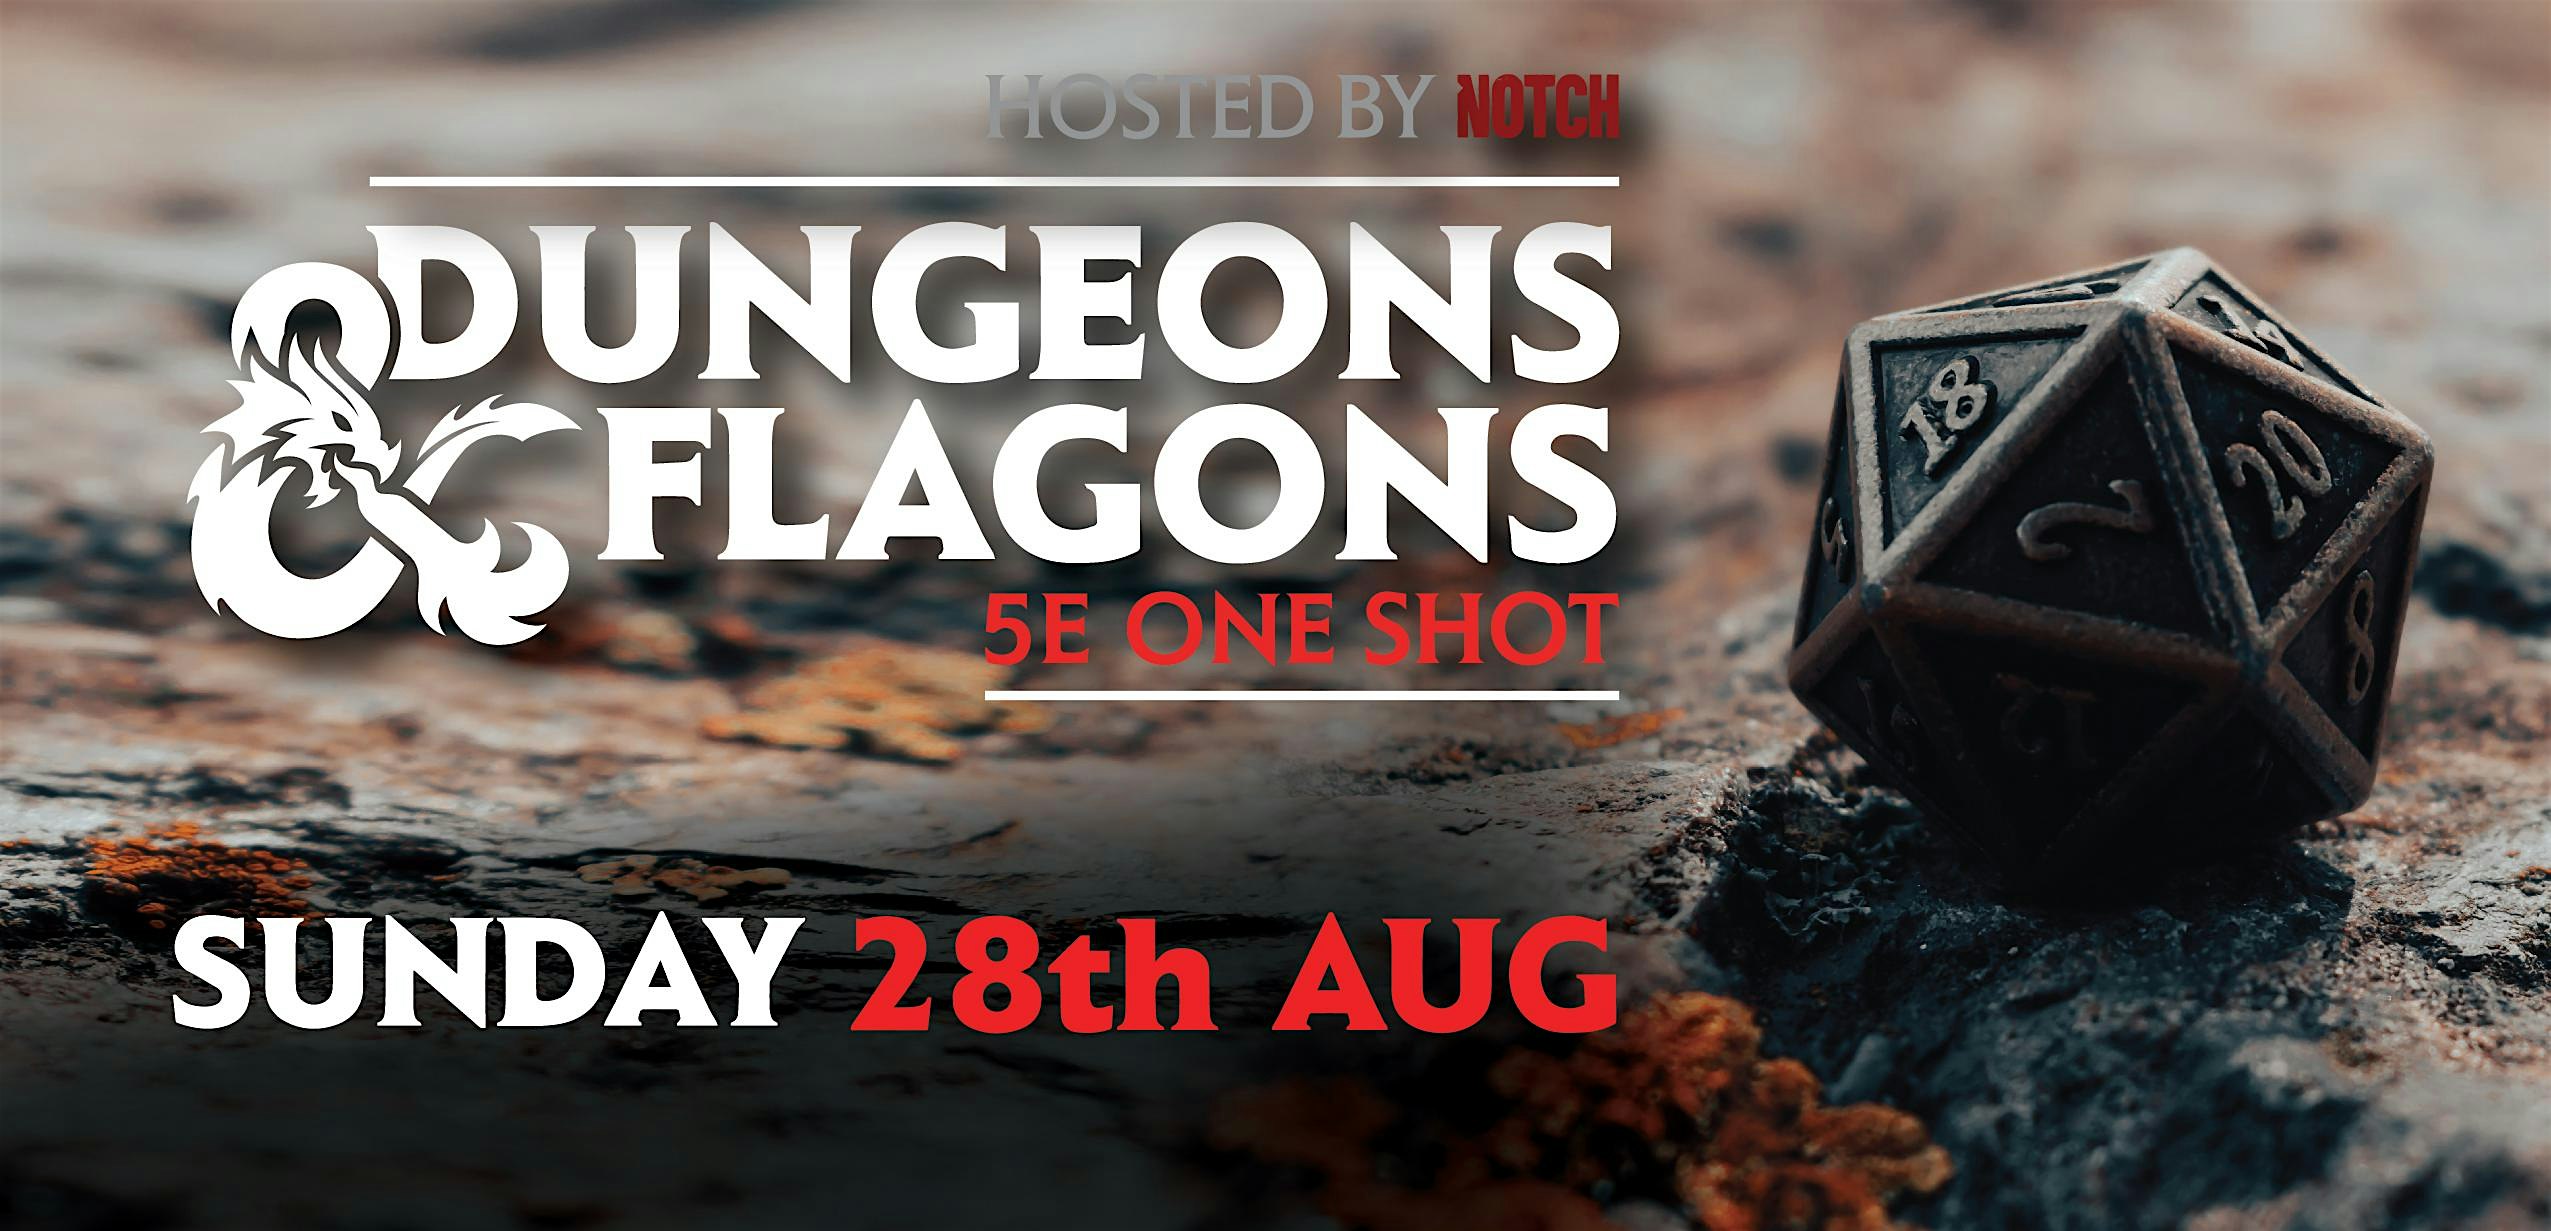 Dungeons & Flagons  - 5E One Shot - August